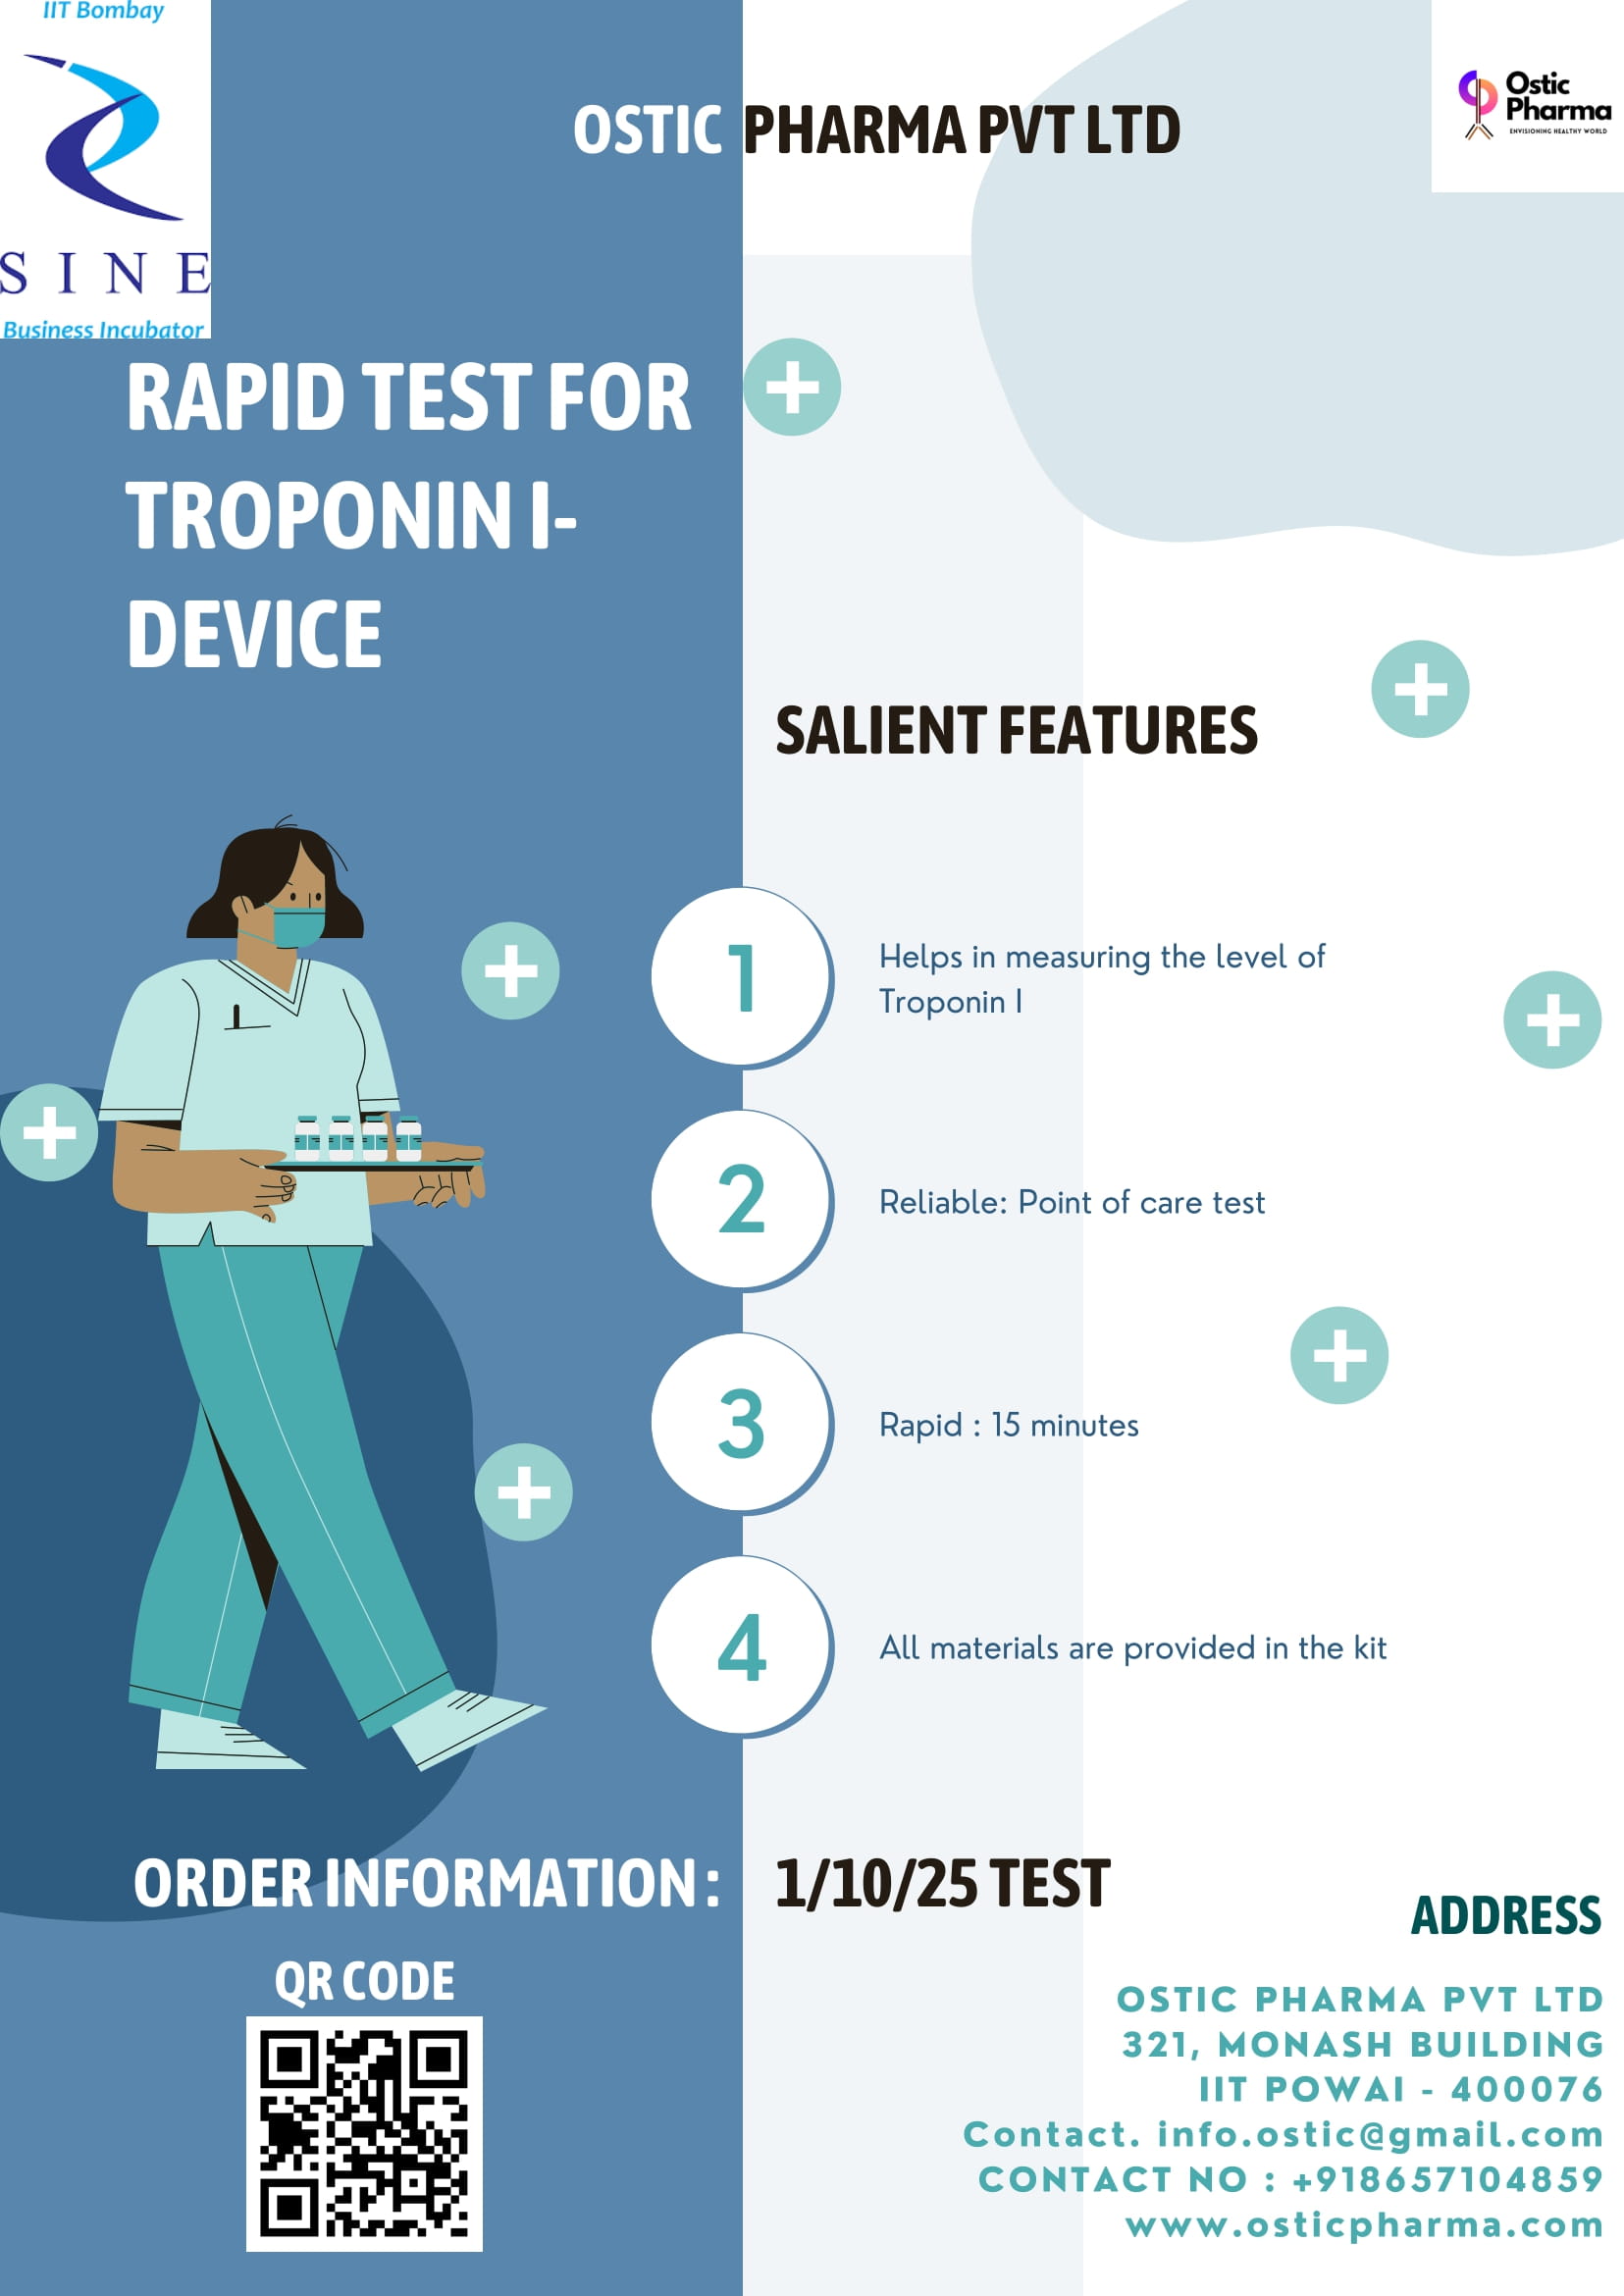 RAPID TEST FOR TROPONIN I-DEVICE